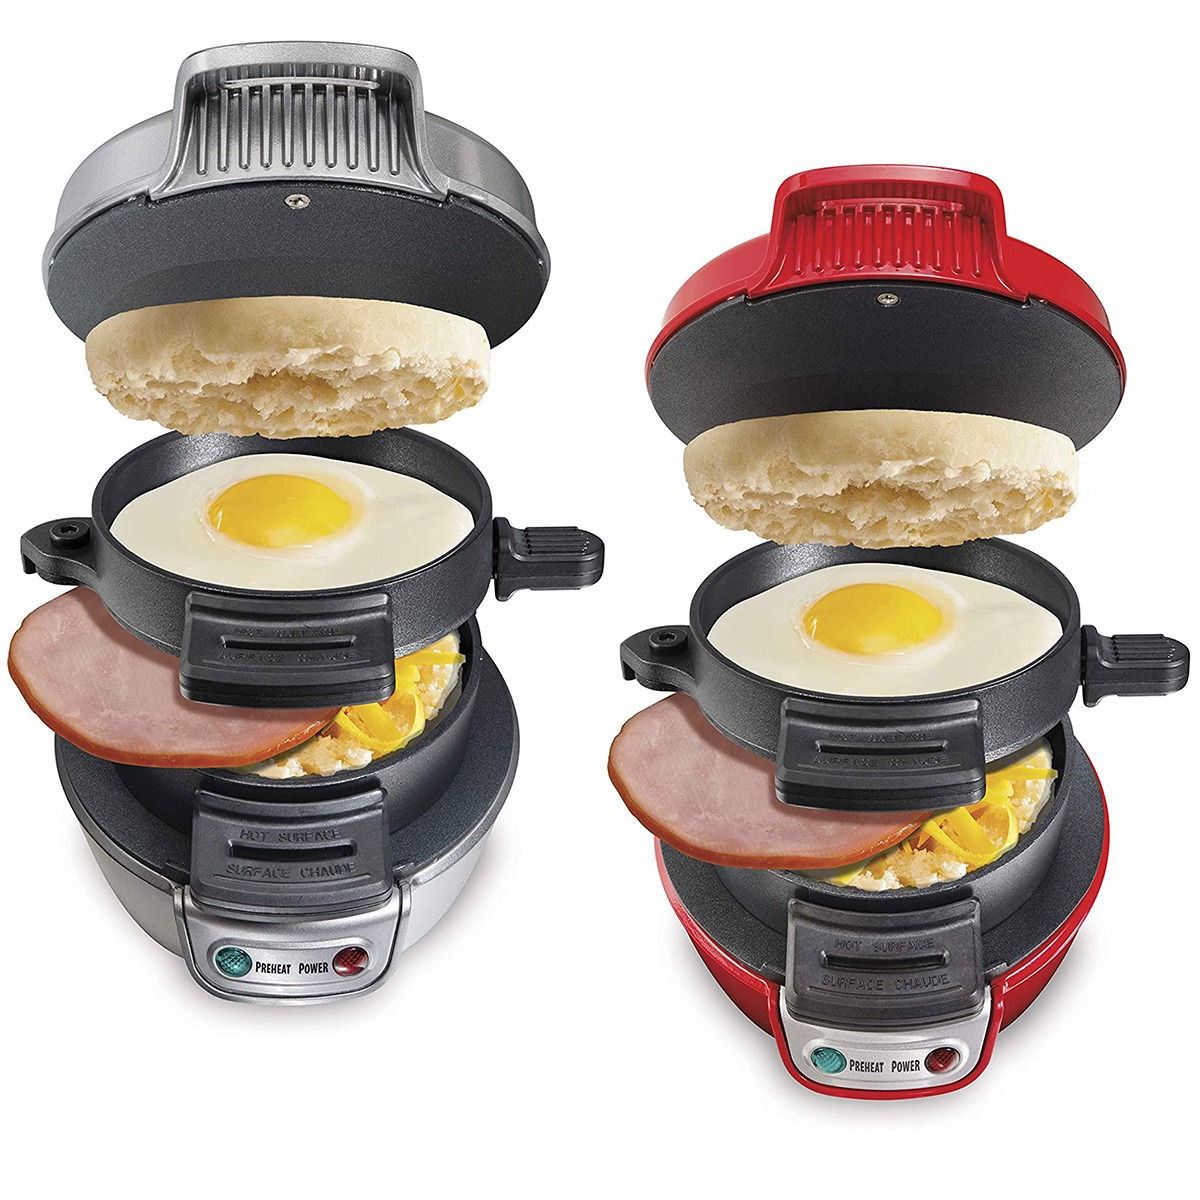 https://akns-images.eonline.com/eol_images/Entire_Site/20221026/rs_1200x1200-221126121142-1200.ecomm-Breakfast-Sandwich-Maker.ct.jpg?fit=around%7C1200:1200&output-quality=90&crop=1200:1200;center,top